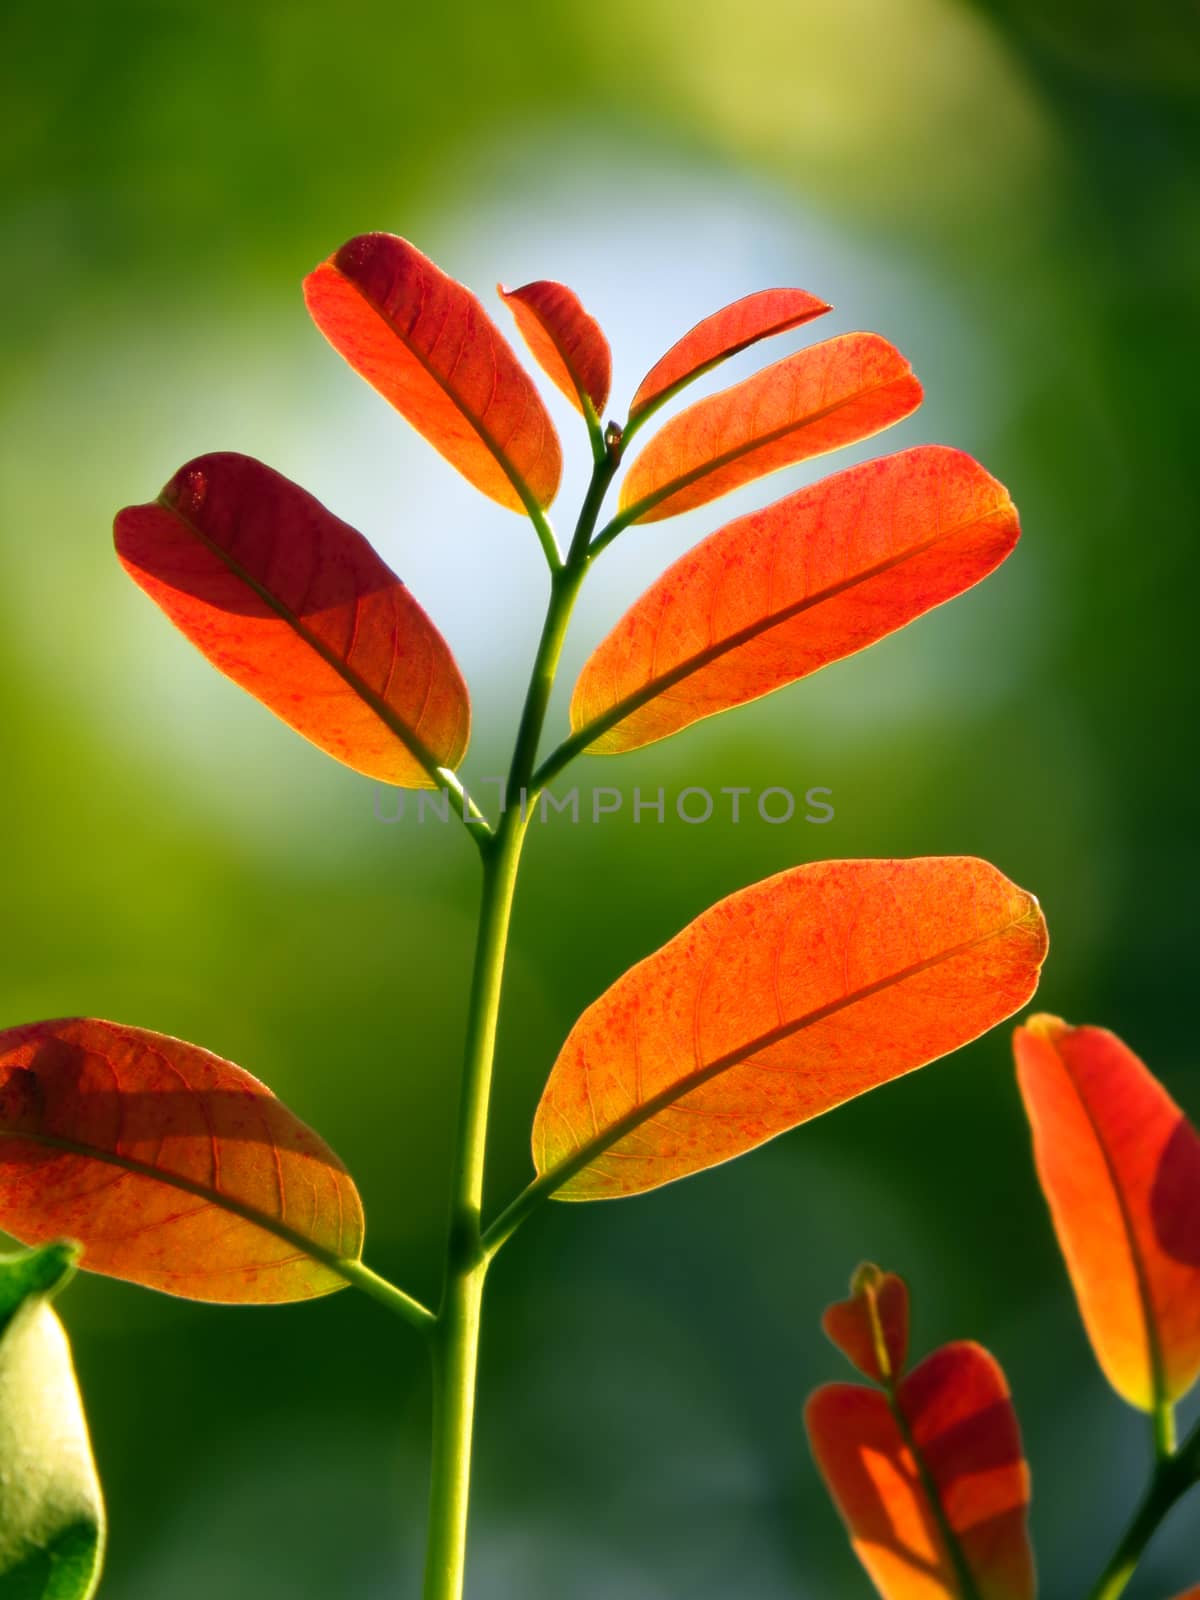 A unique photo of bright colored tender leaves of a tree growing towards light                               